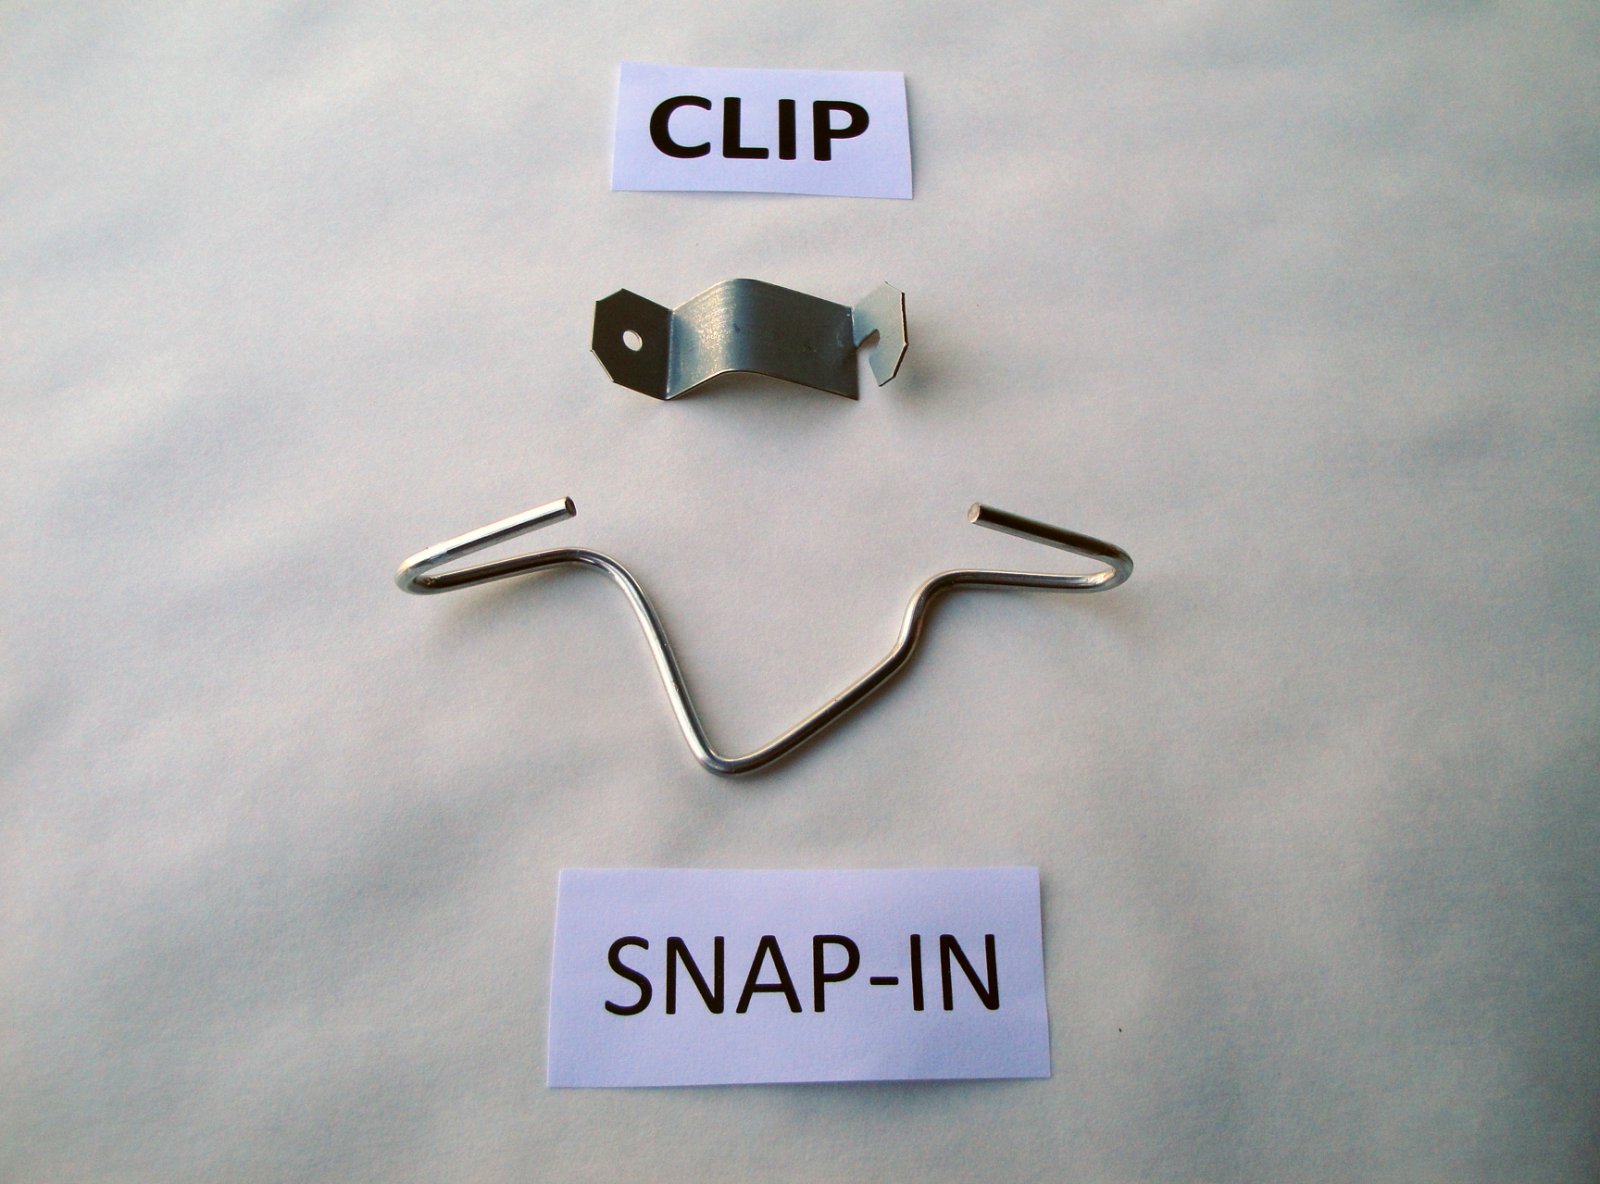 SITC – Snap-In Crossarm Clip for T-Post, Assembled